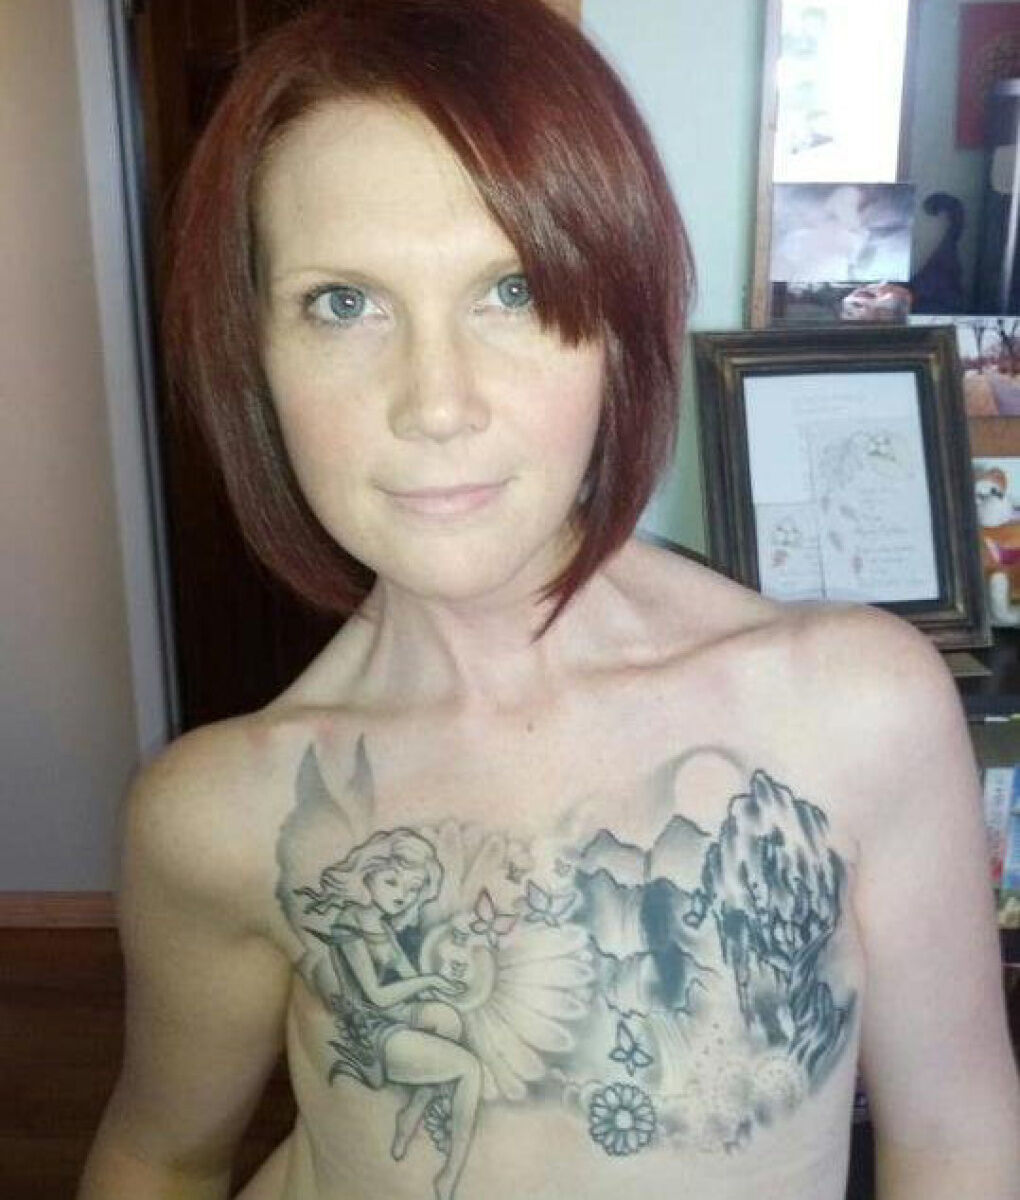 Topless photo of breast cancer survivor goes viral